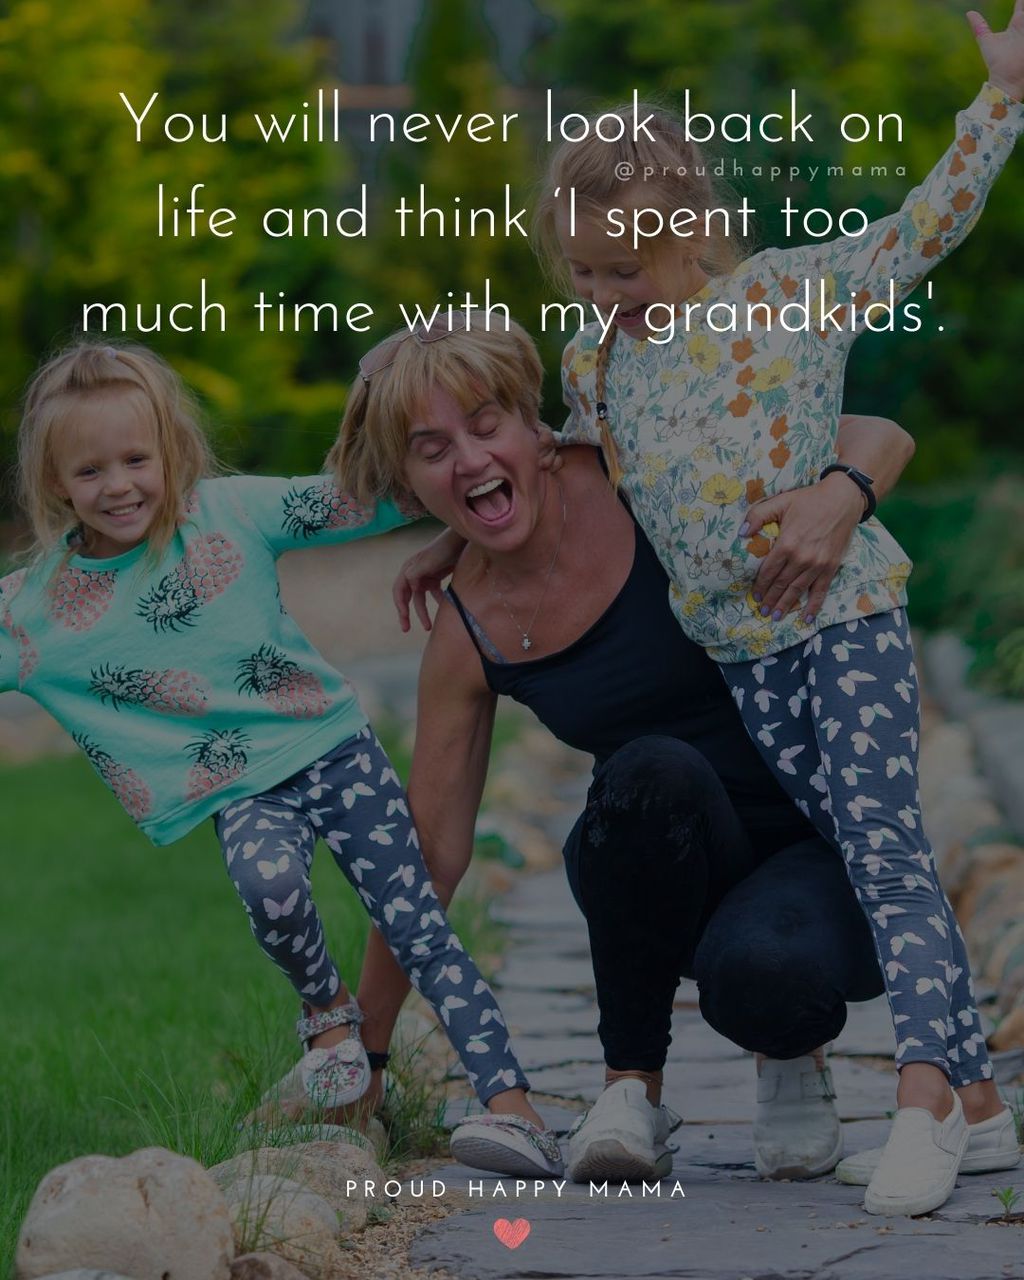 Quotes for Grandchildren - You will never look back on life and think I spent too much time with my grandkids.